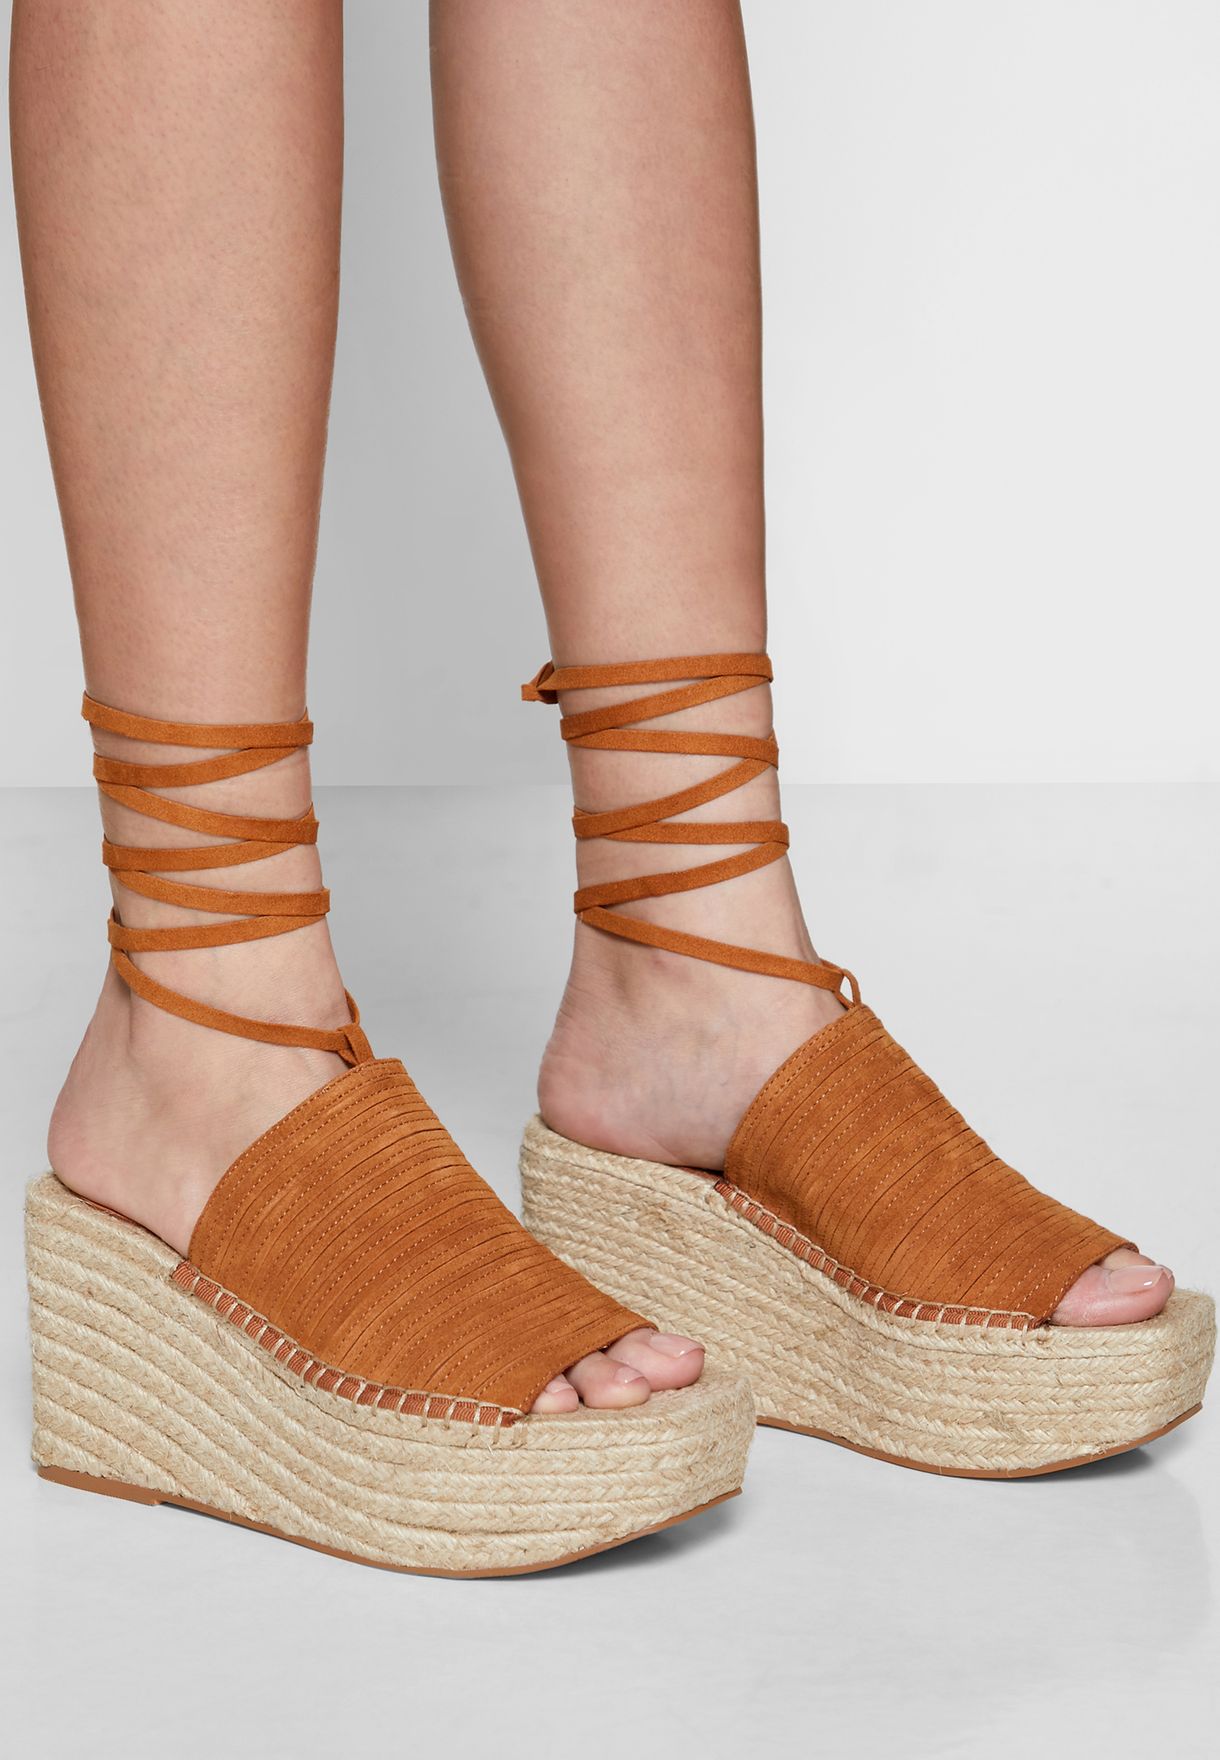 topshop whitney wedges